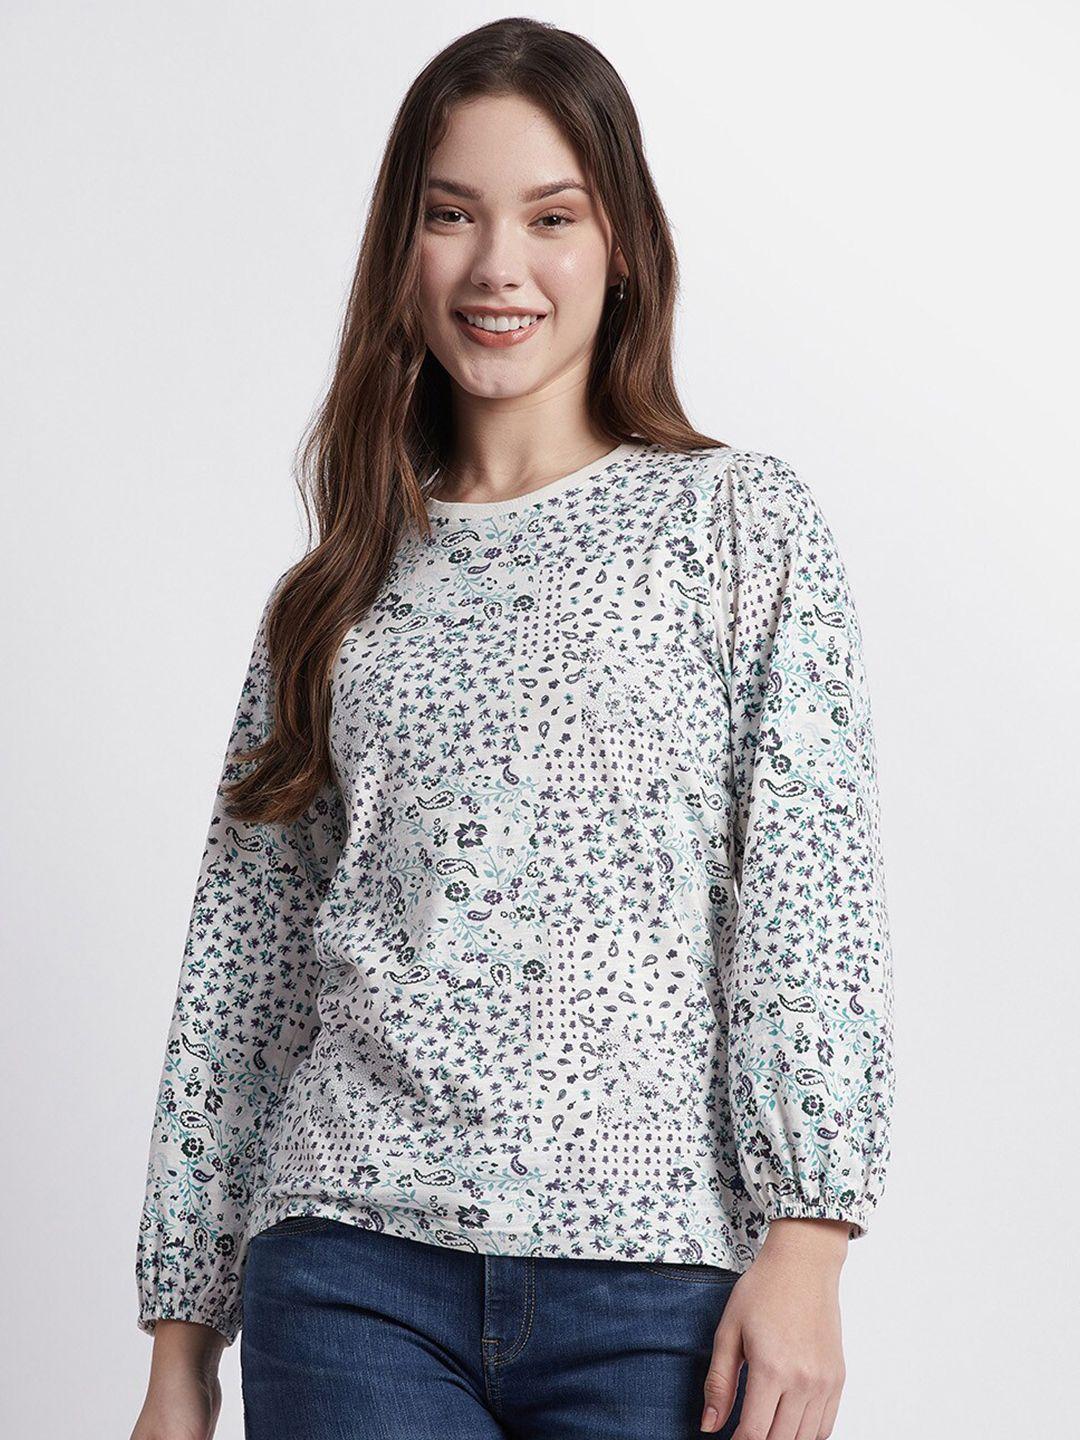 beverly hills polo club floral printed puff sleeves pure cotton top